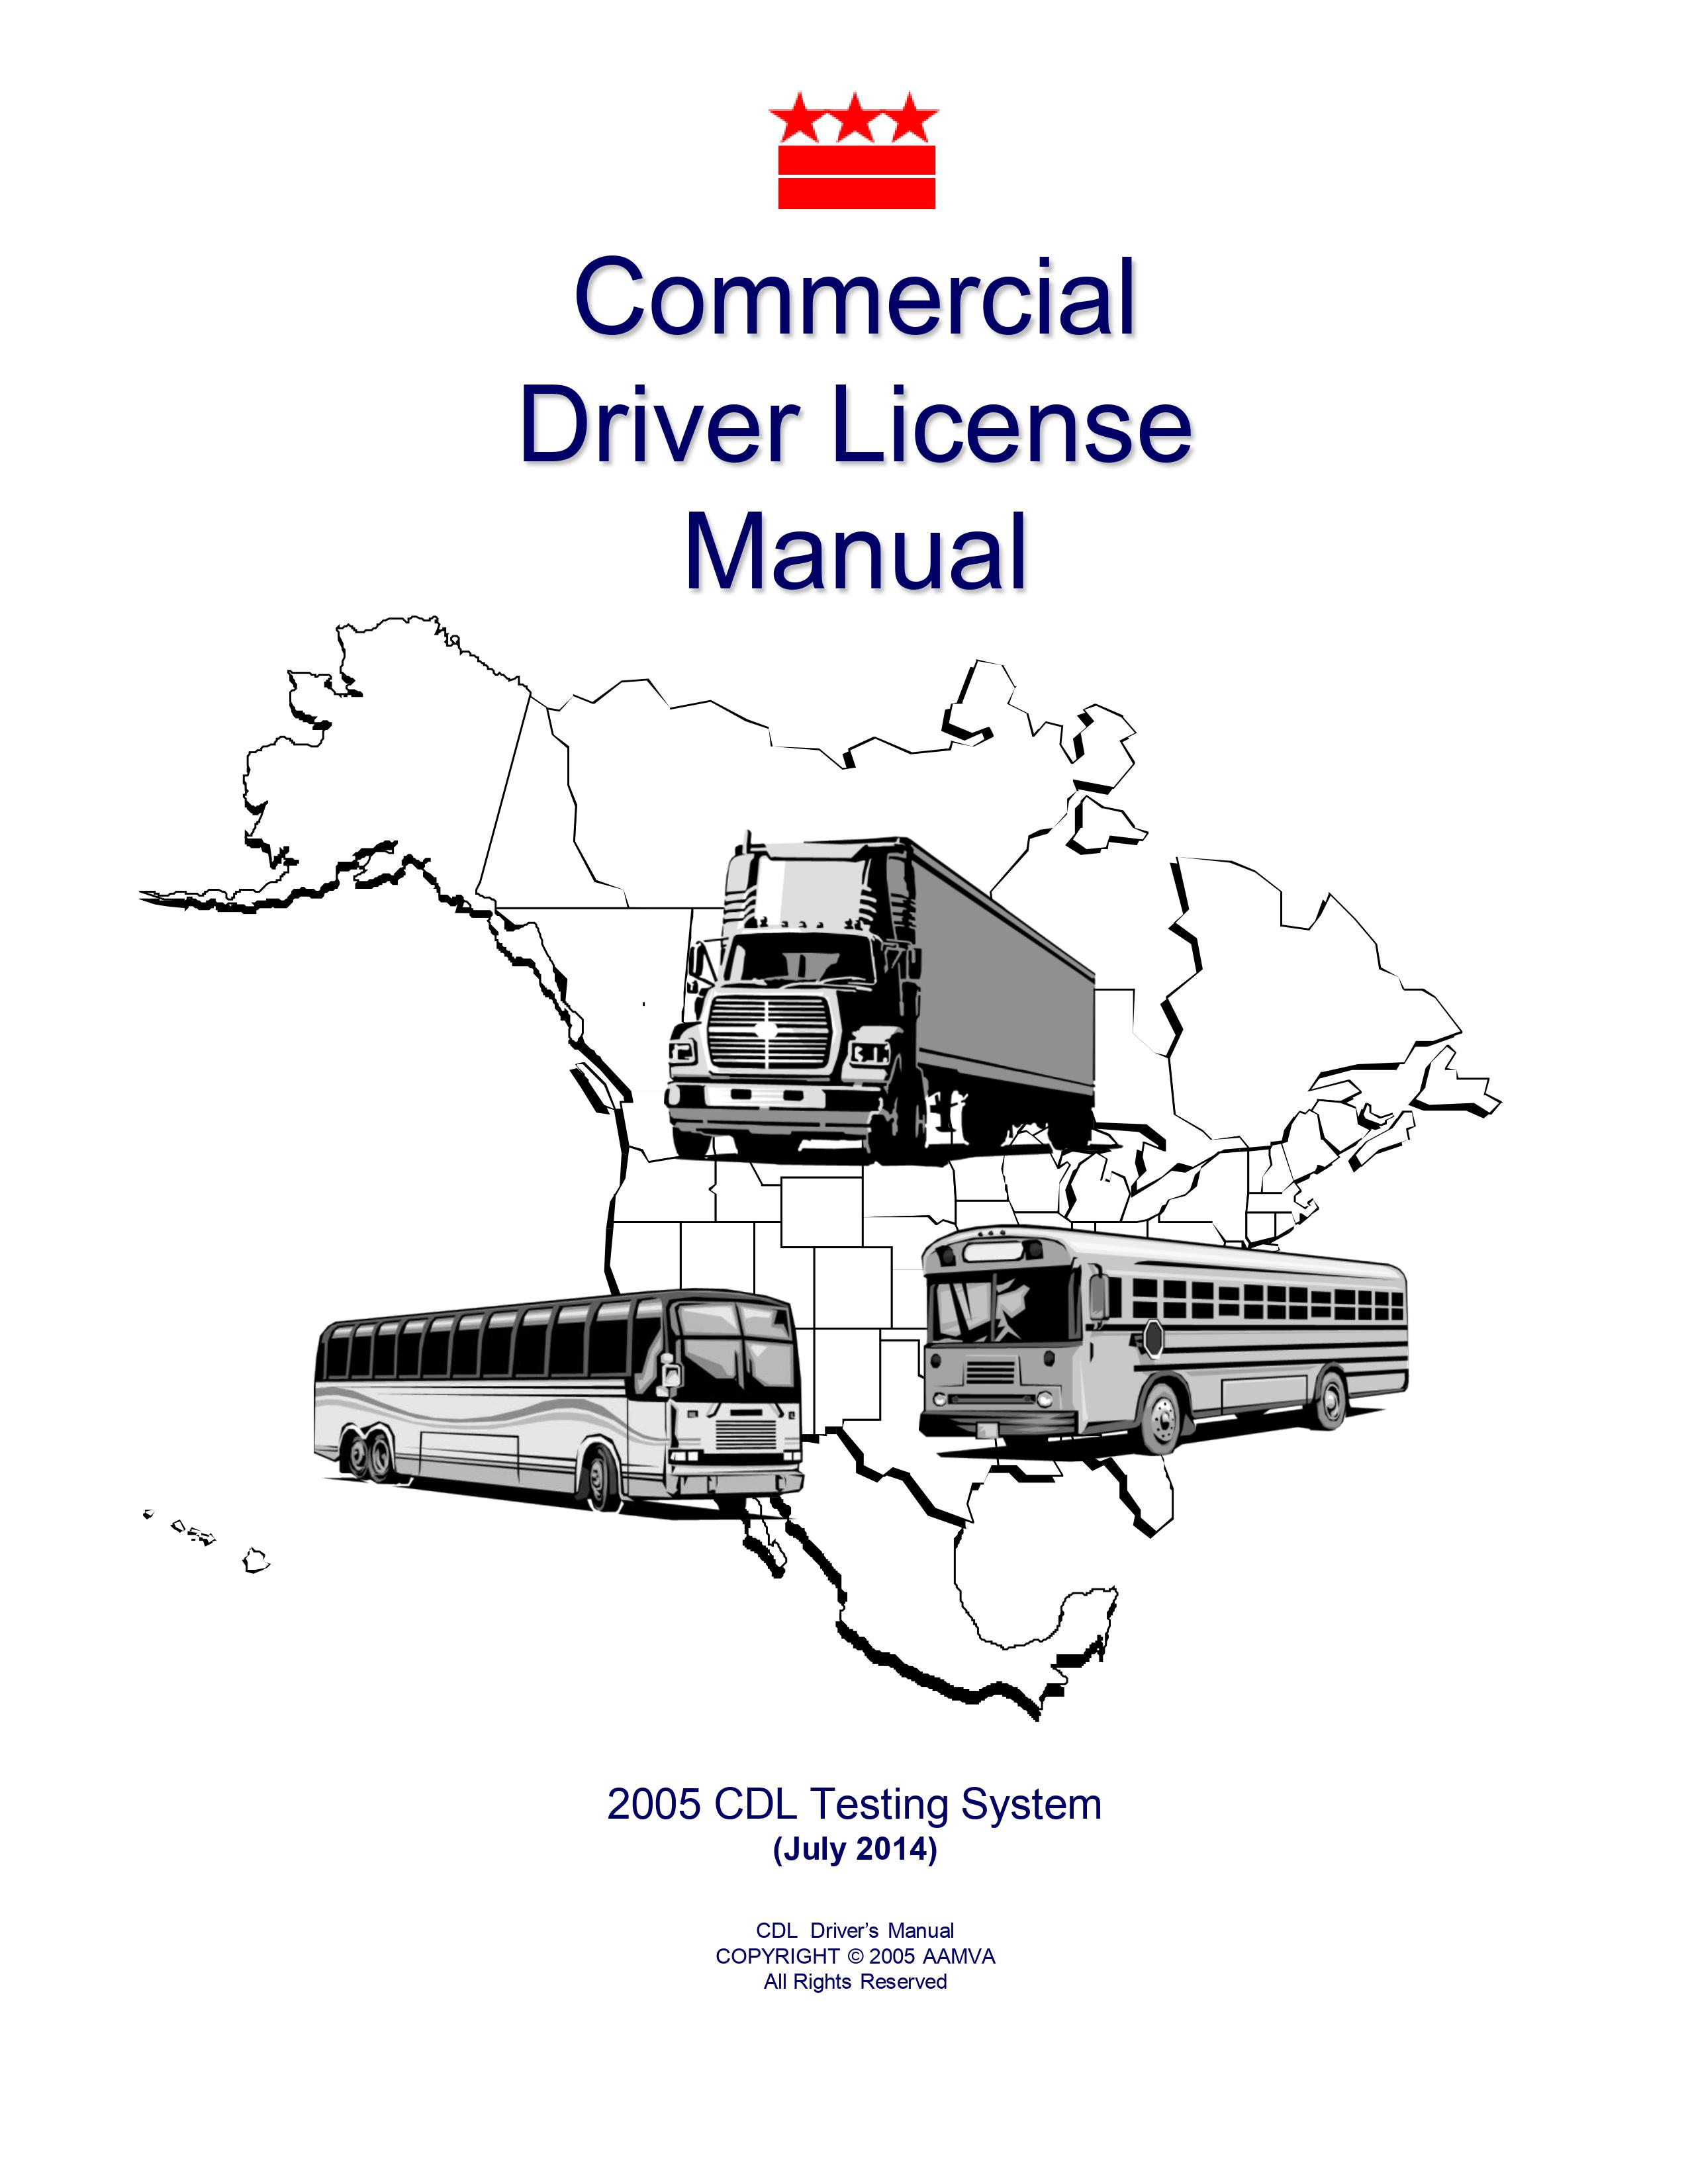 District of Columbia's CDL Manual